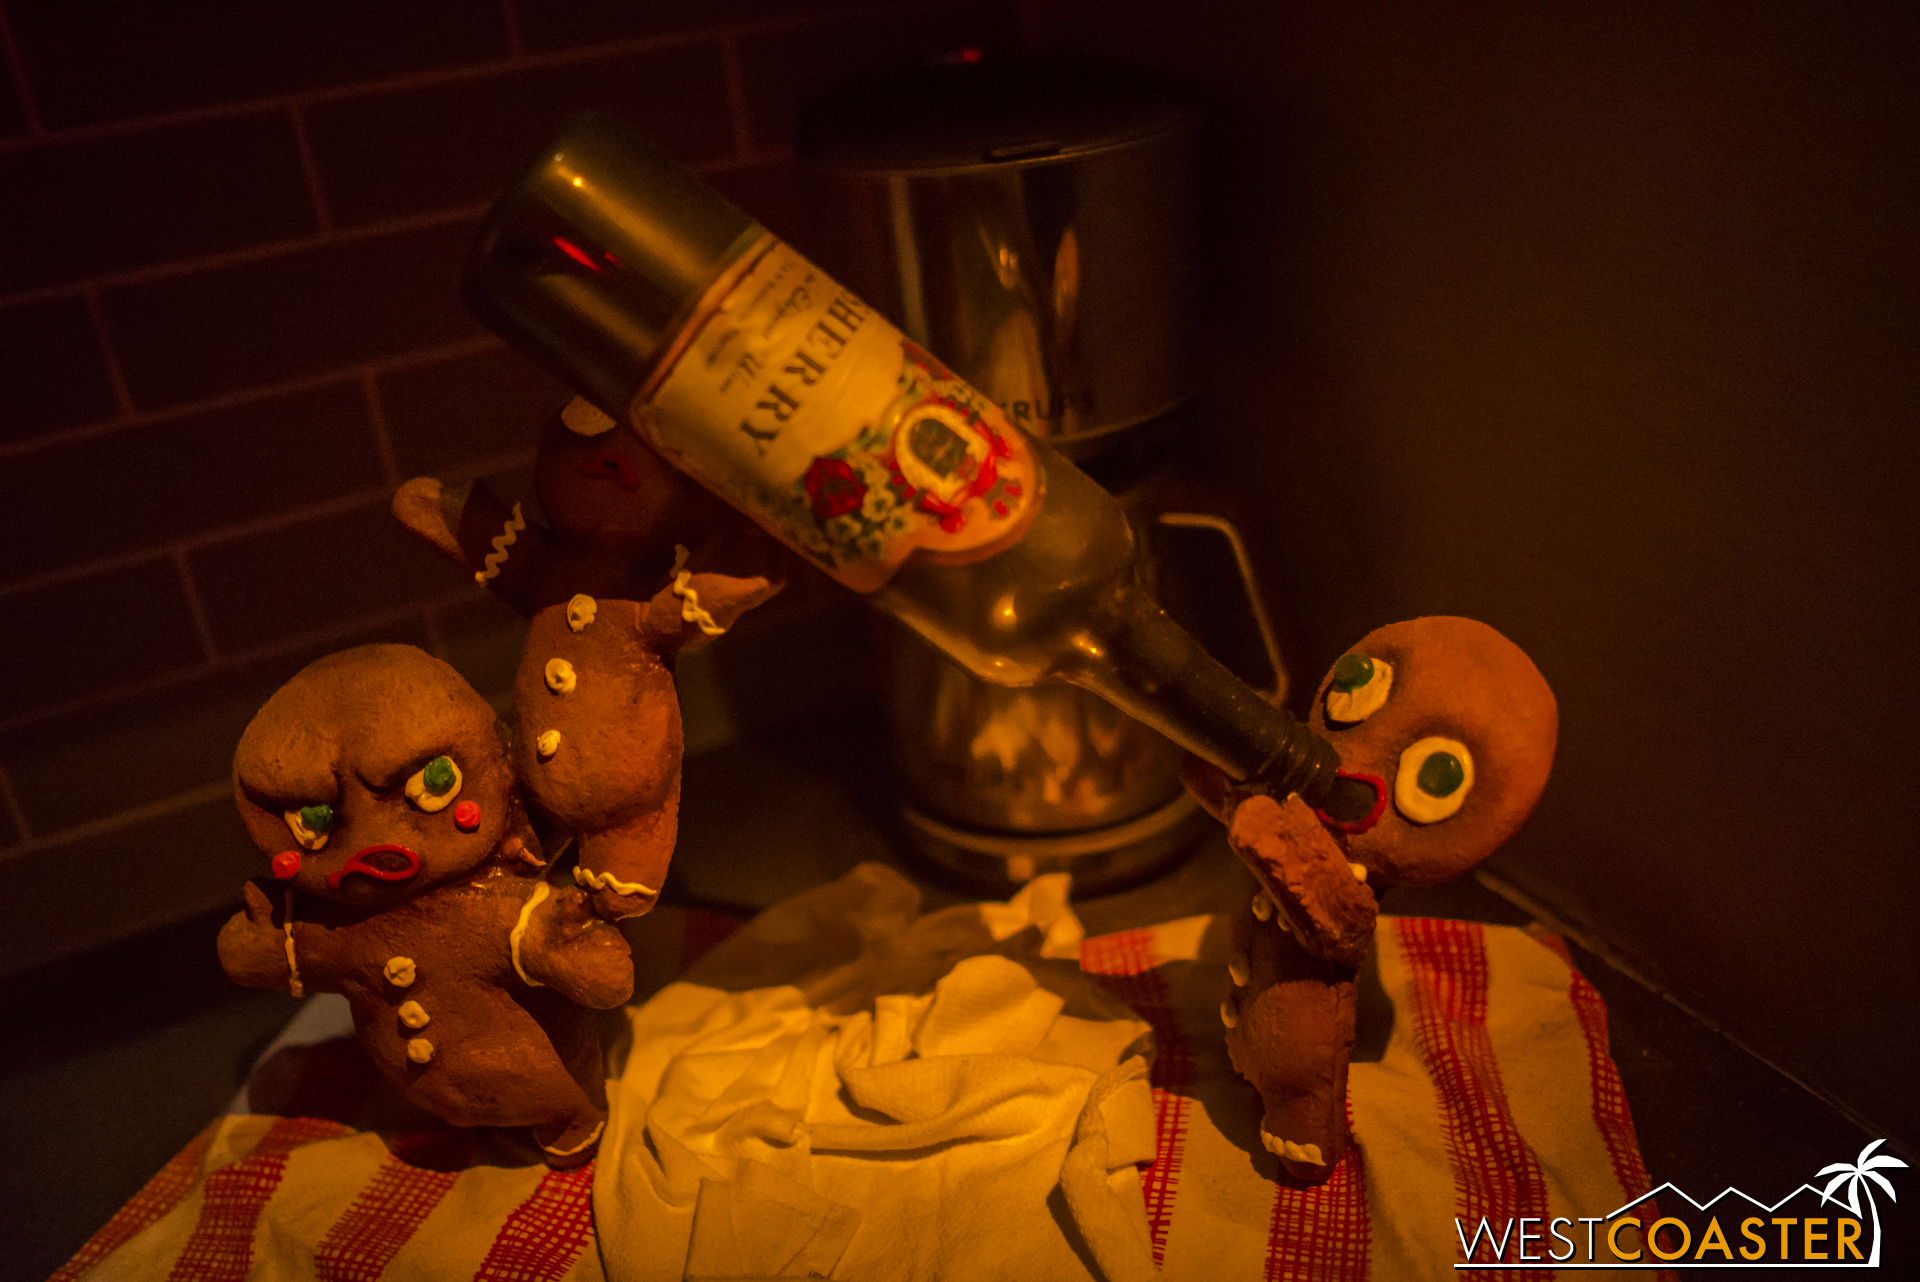  This was probably my favorite detail of the night.&nbsp; Alcholic possessed gingerbread men? What could go wrong?   